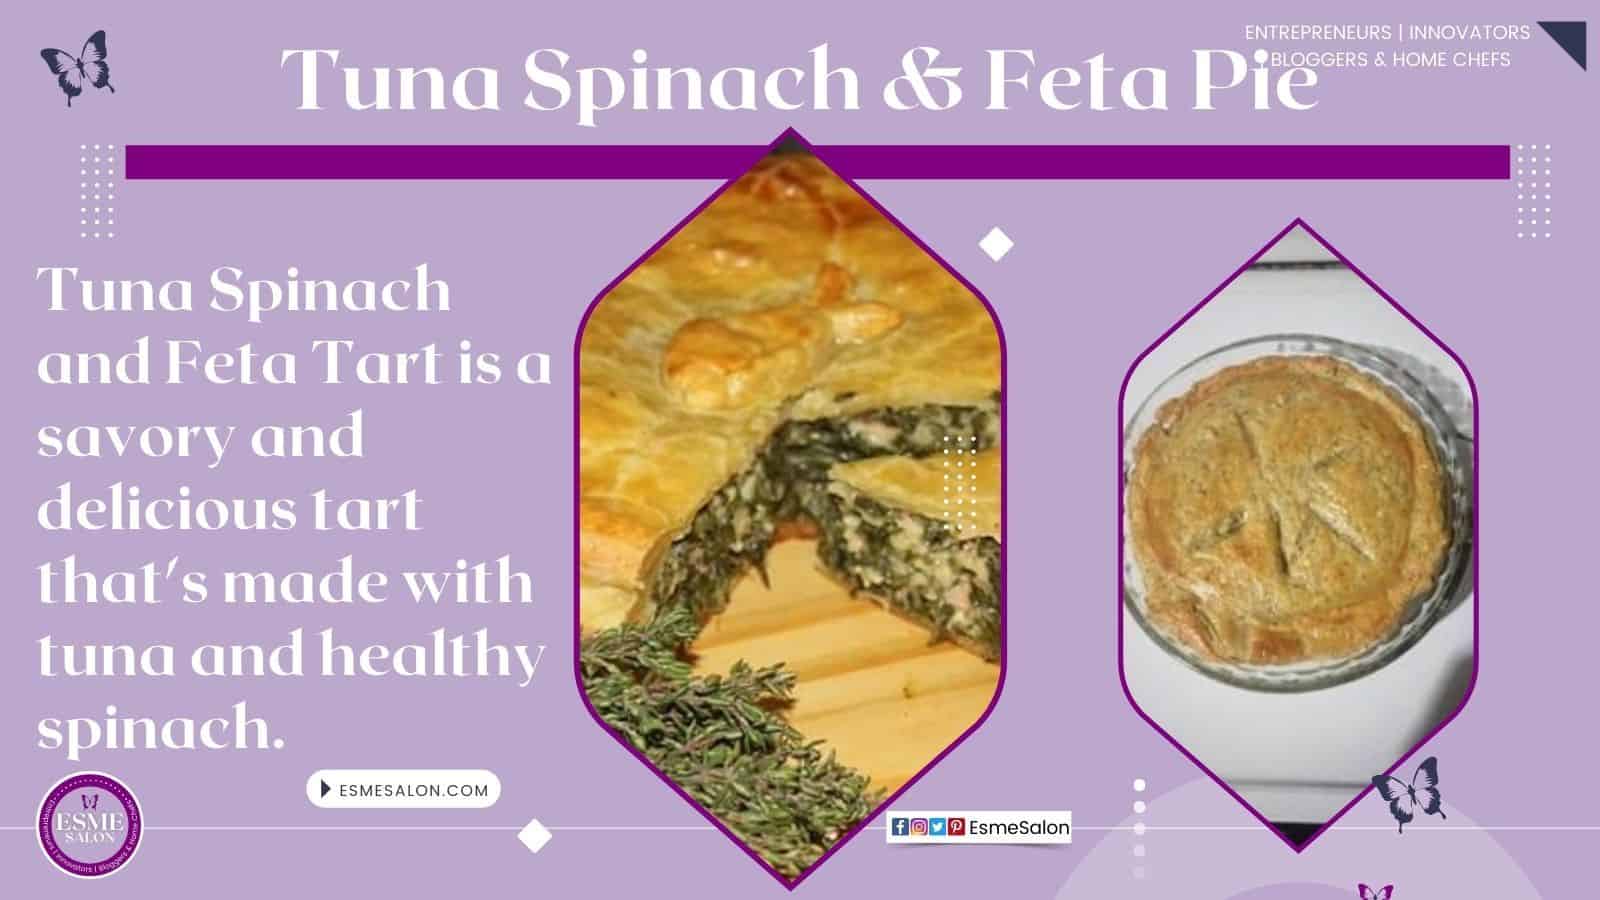 An image of a Tuna Spinach & Feta Pie sliced to show the delicious spinach and feta filling